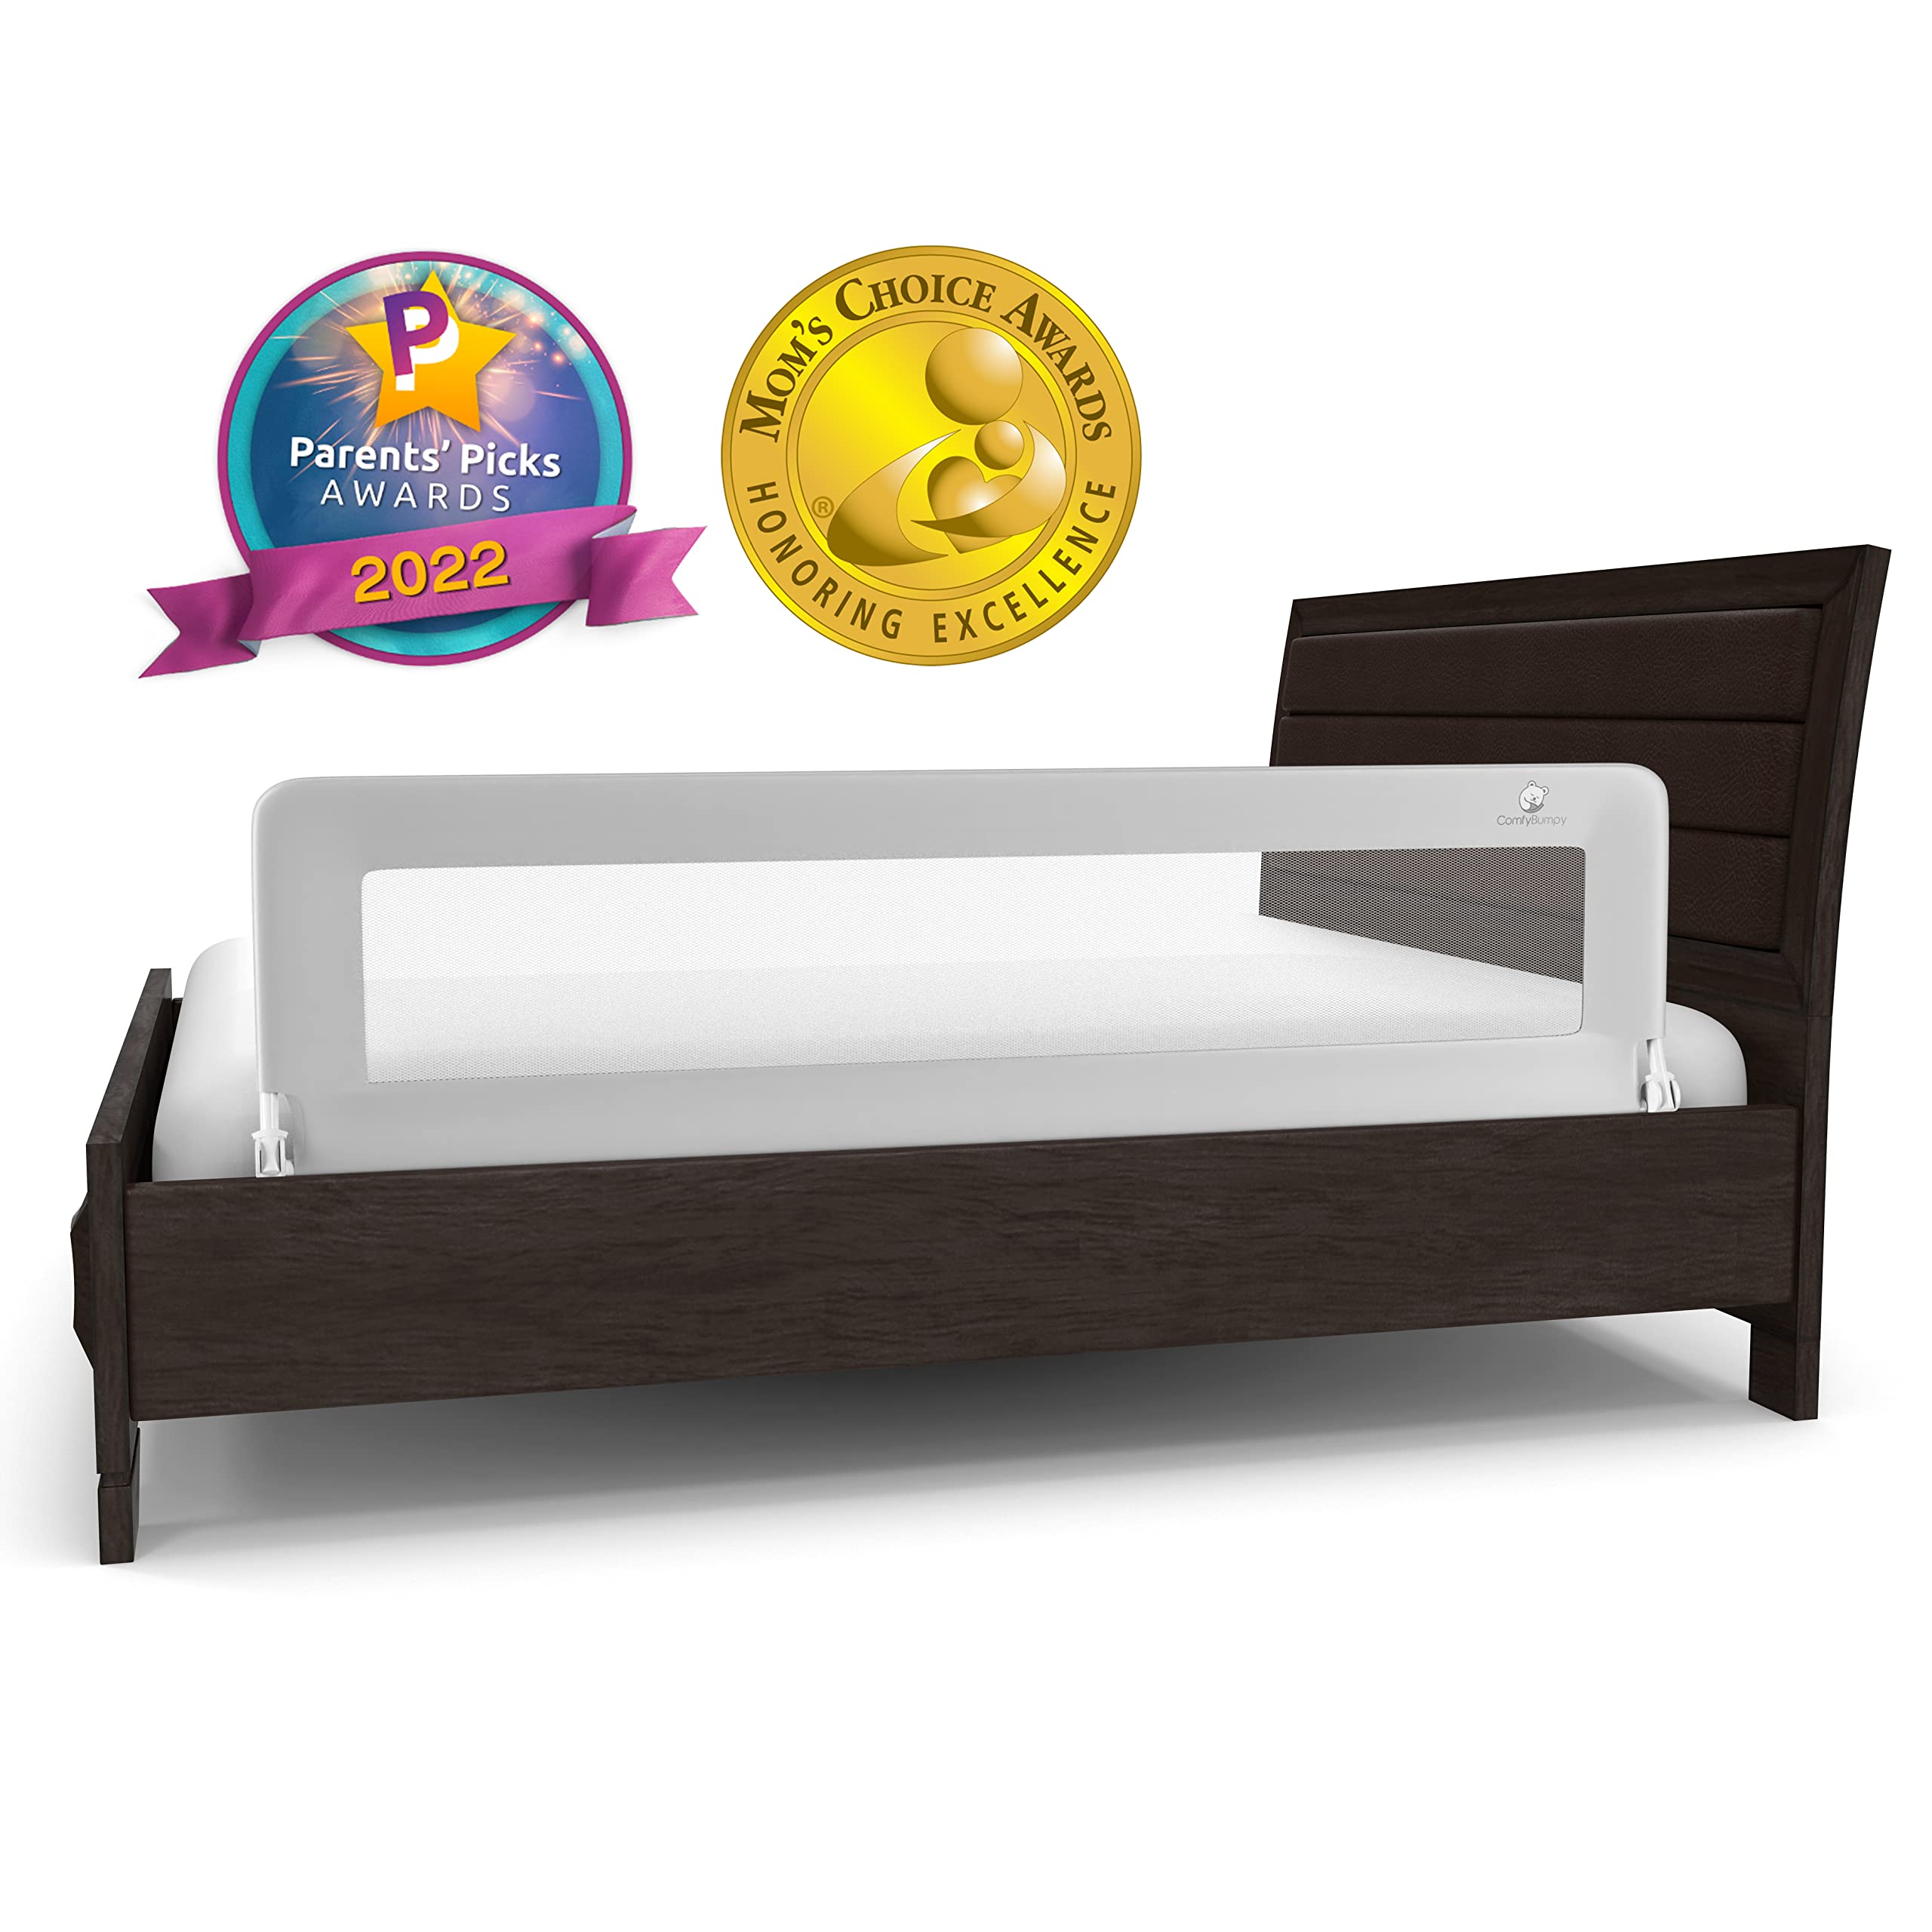 Bed Rail for Toddlers - Extra Long Toddler Bedrail Guard for Kids